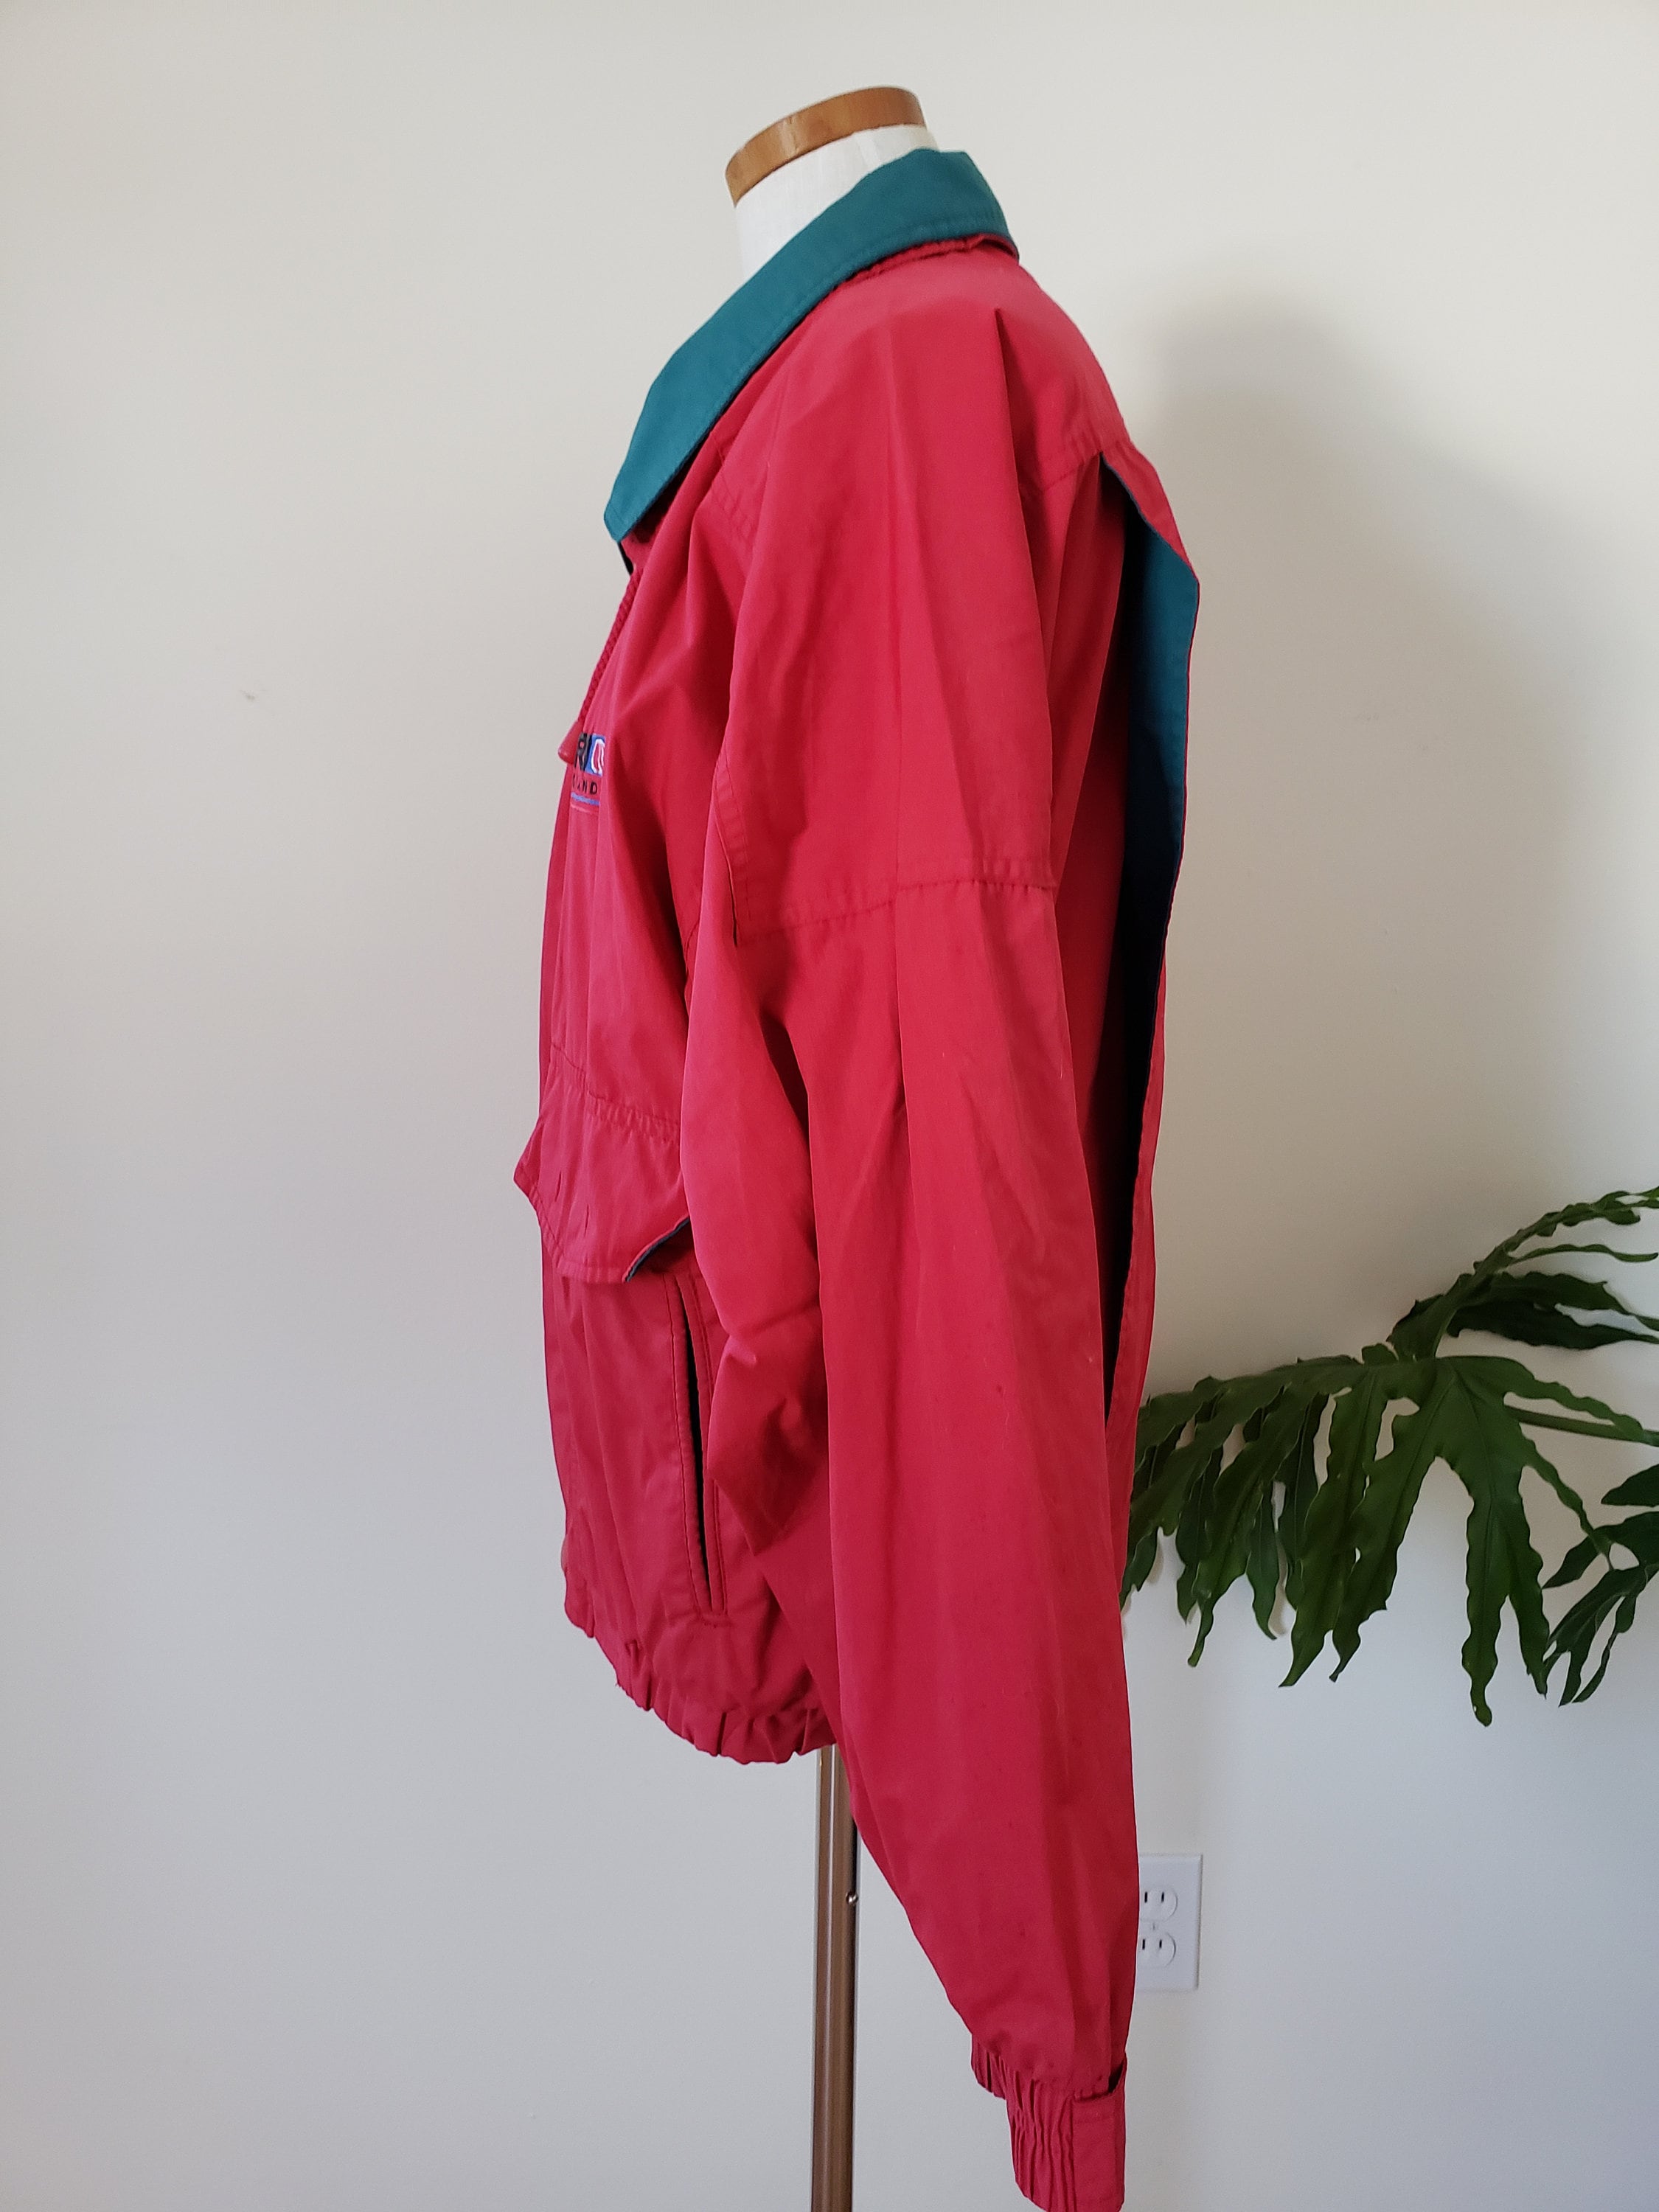 1980s Red and Green Windbreaker Jacket With SIX Pockets | Etsy